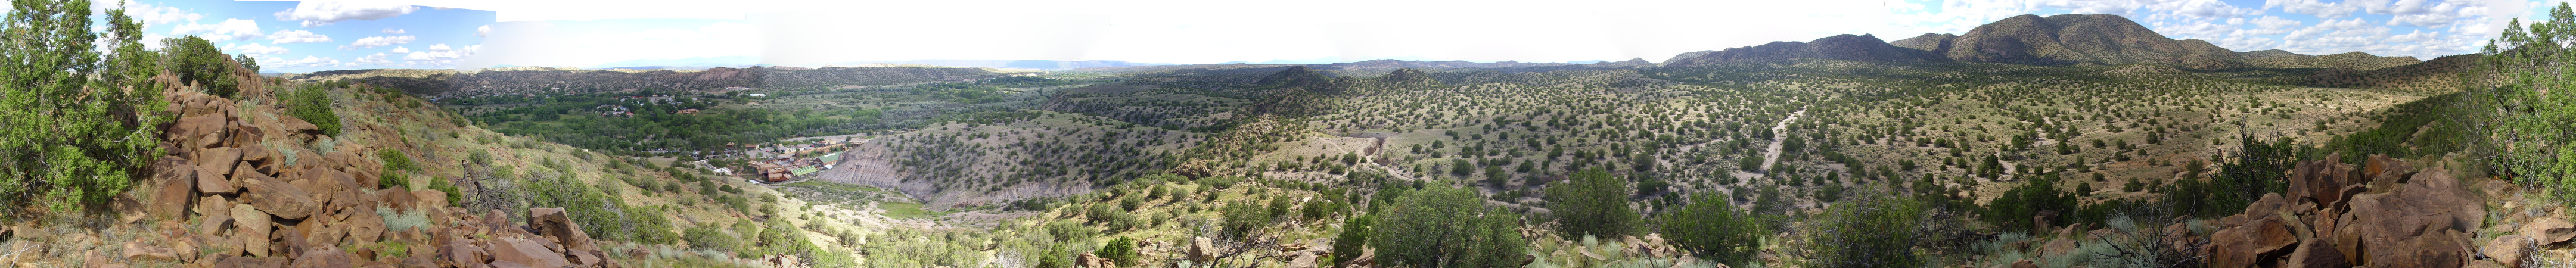 Panorama from
        northwest of Ojo Caliente